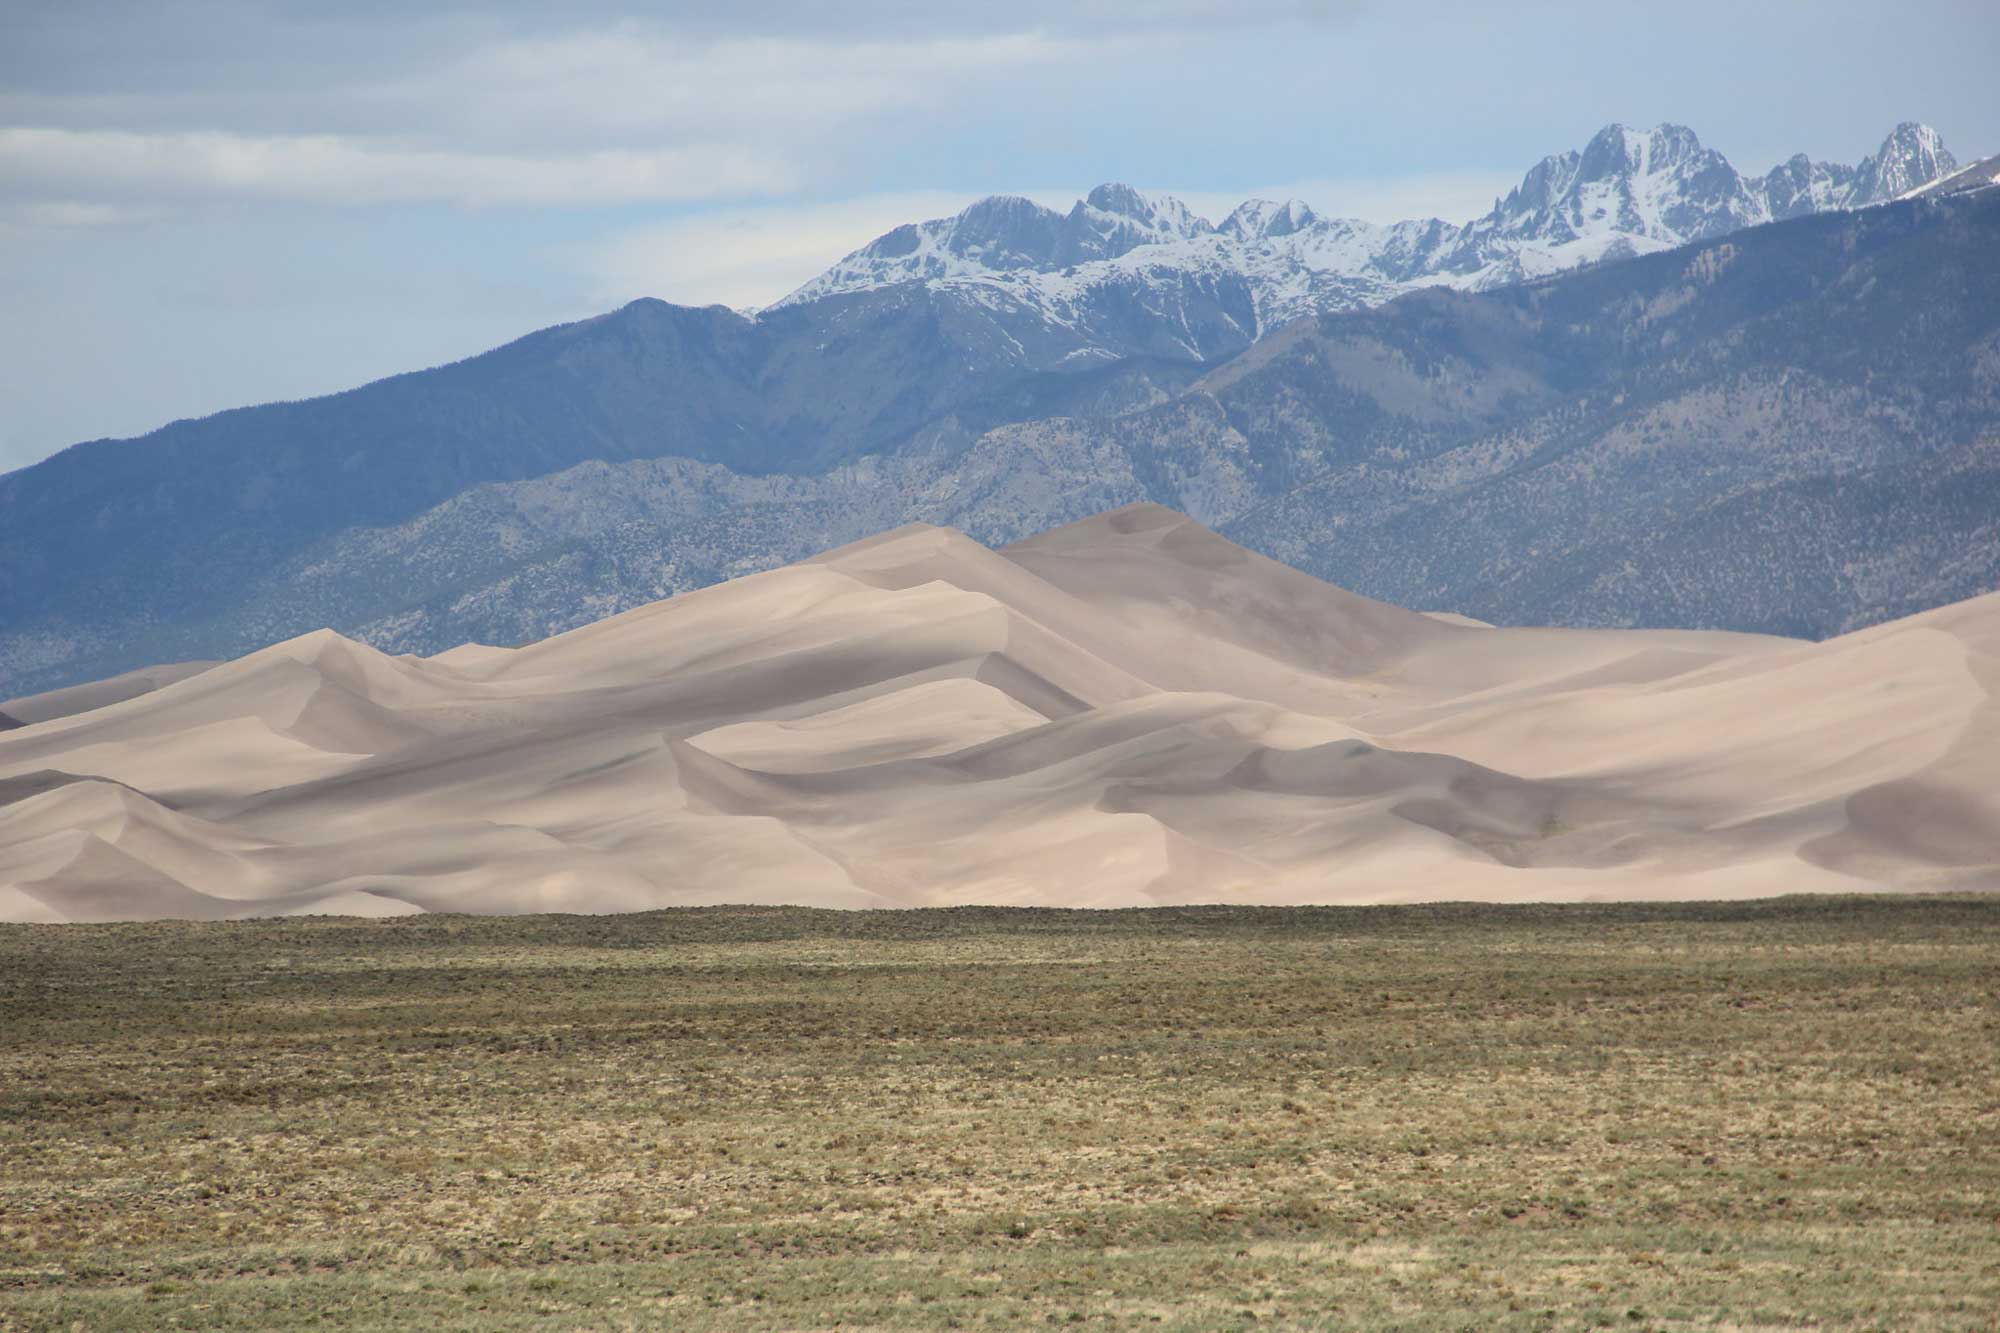 Photograph of dunes at Great Sand Dunes National Park.